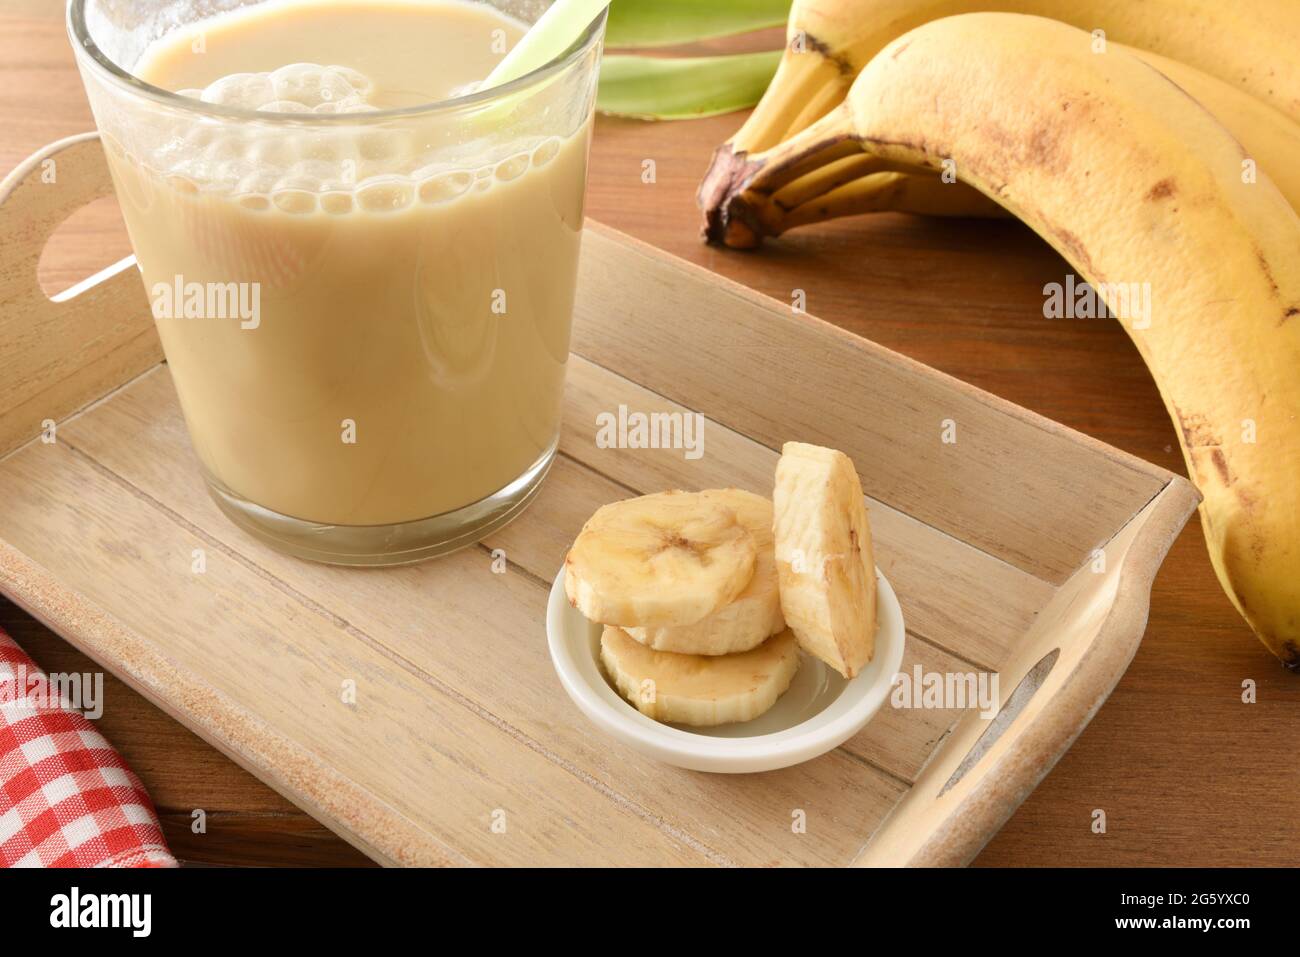 Banana drink with milk in glass on tray with fruit around and wooden table. Elevated view. Stock Photo